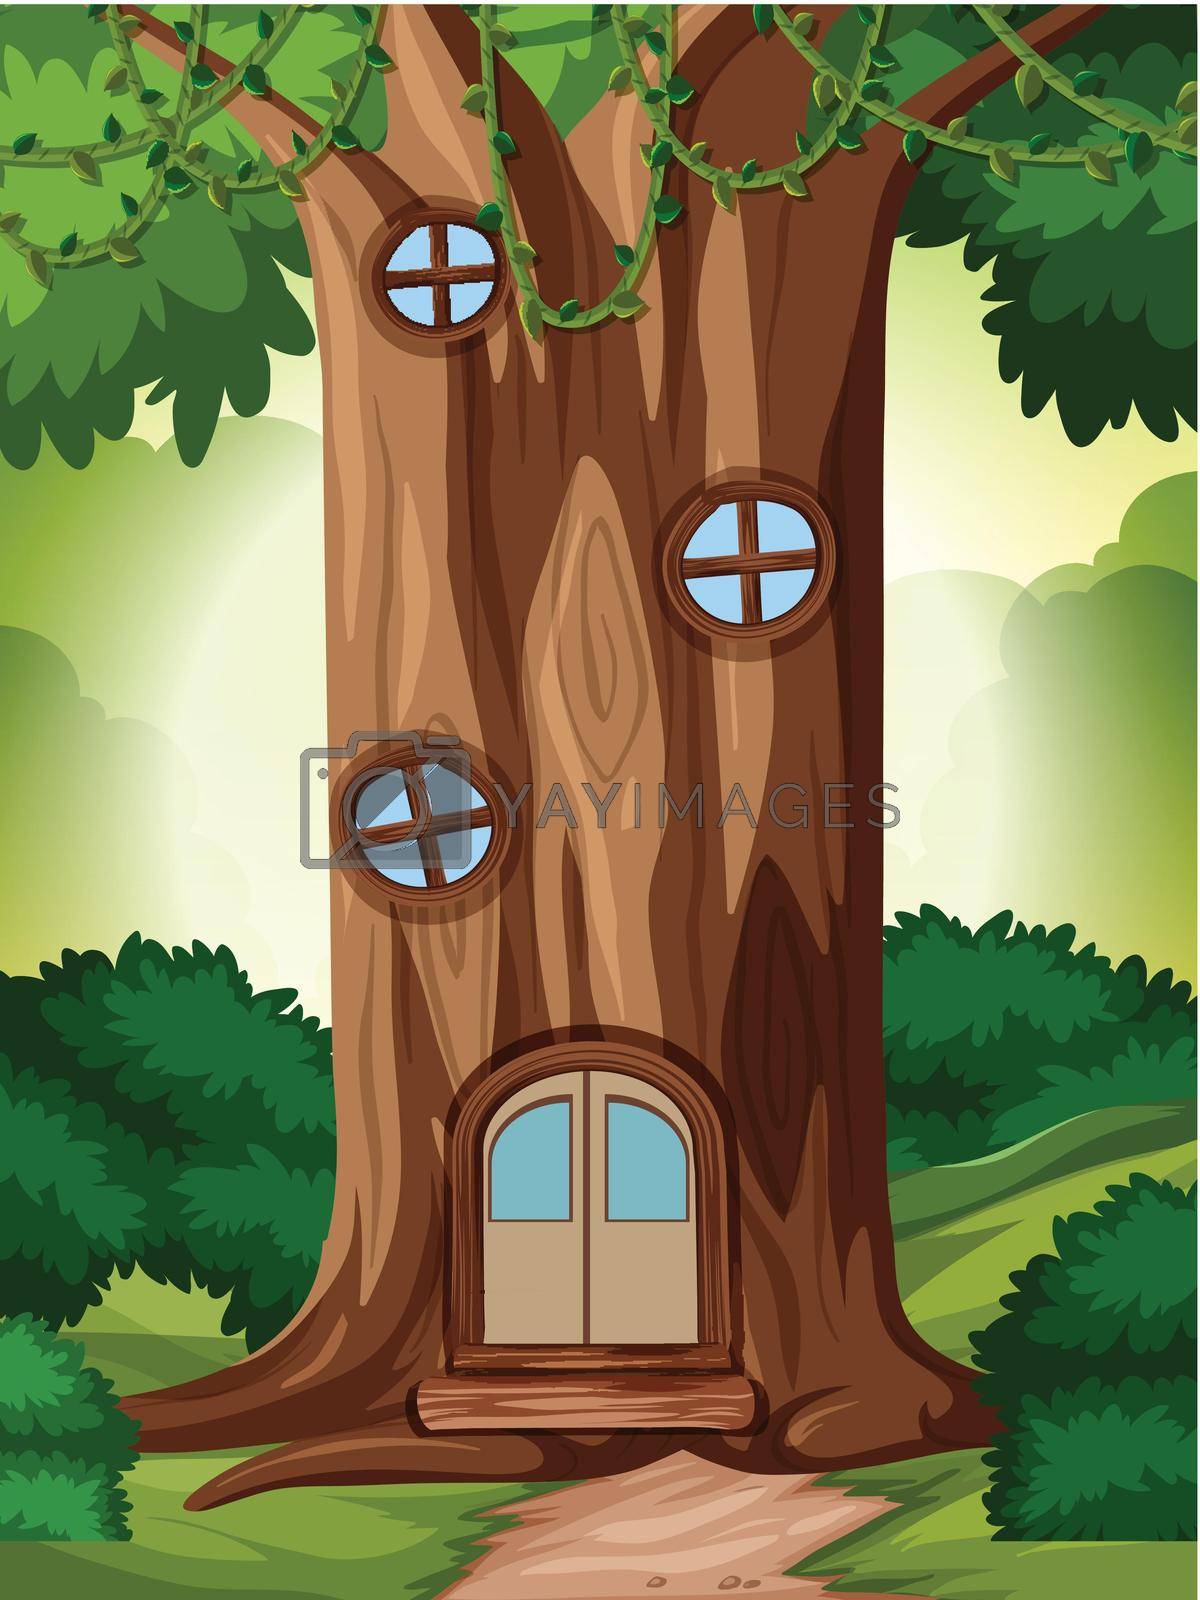 Royalty free image of A fairy tale house in nature by iimages